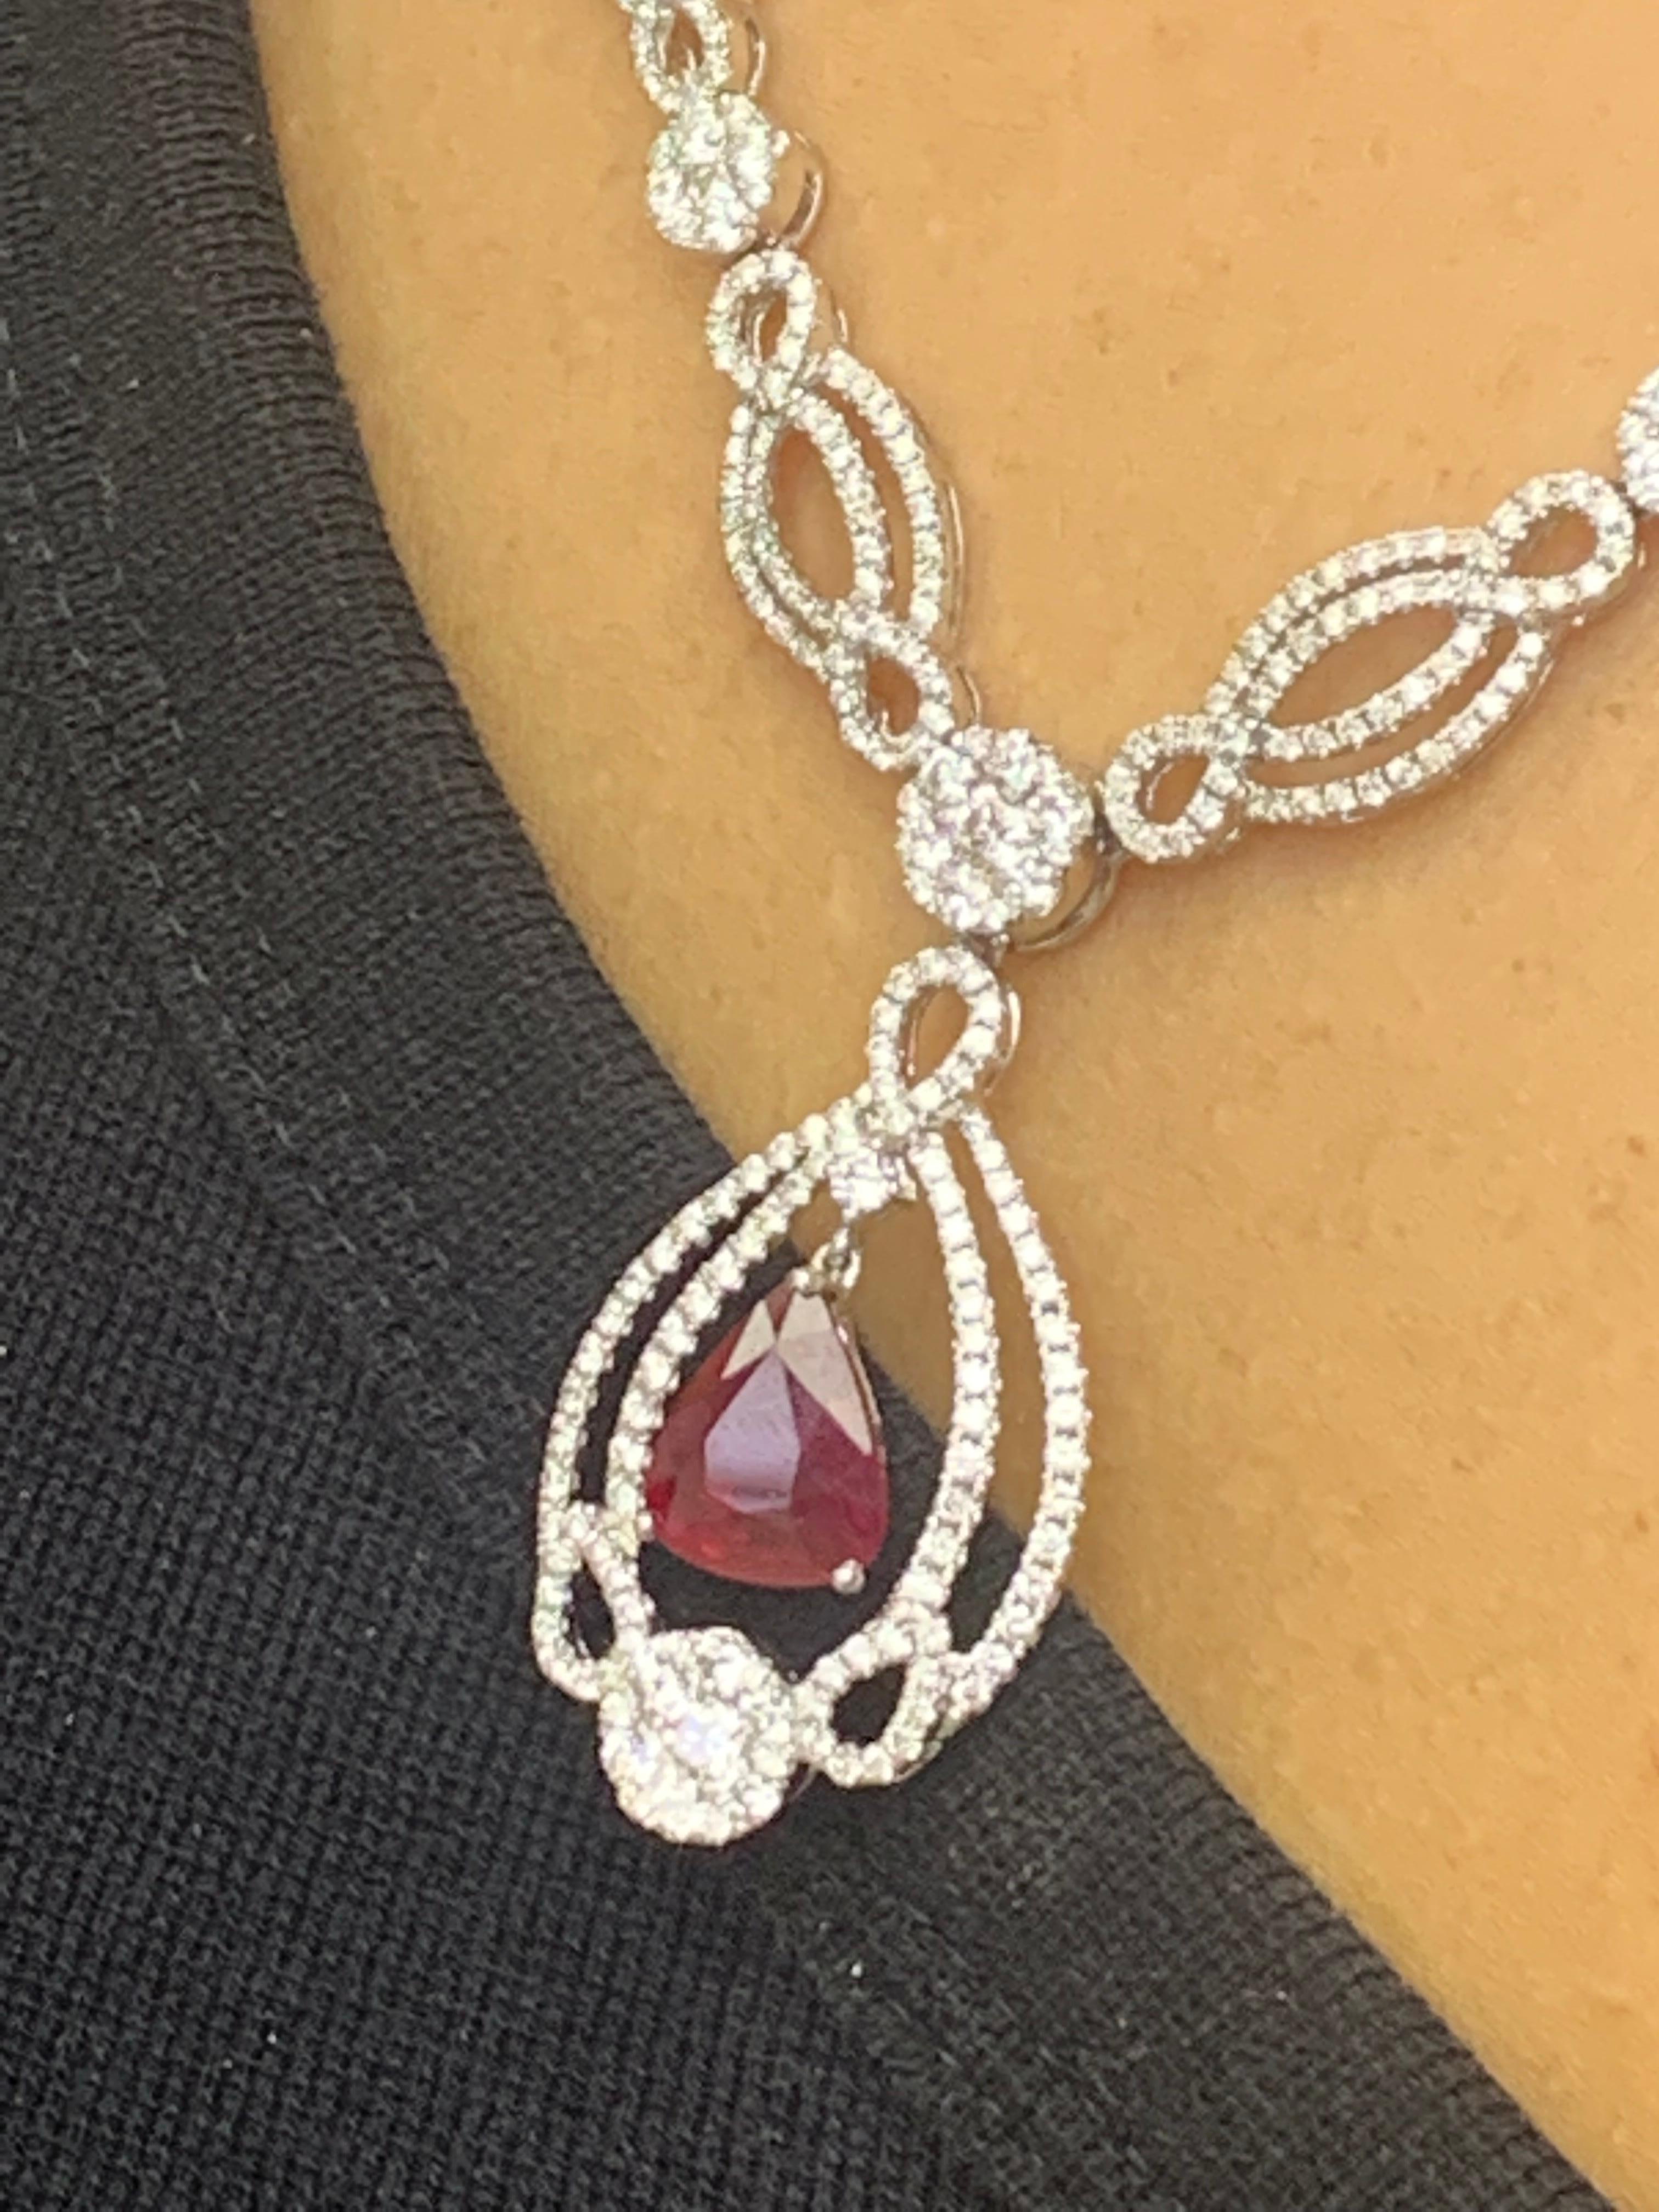 3.52 Carat Pear Shape Ruby and Diamond Necklace in 18 White Gold For Sale 7